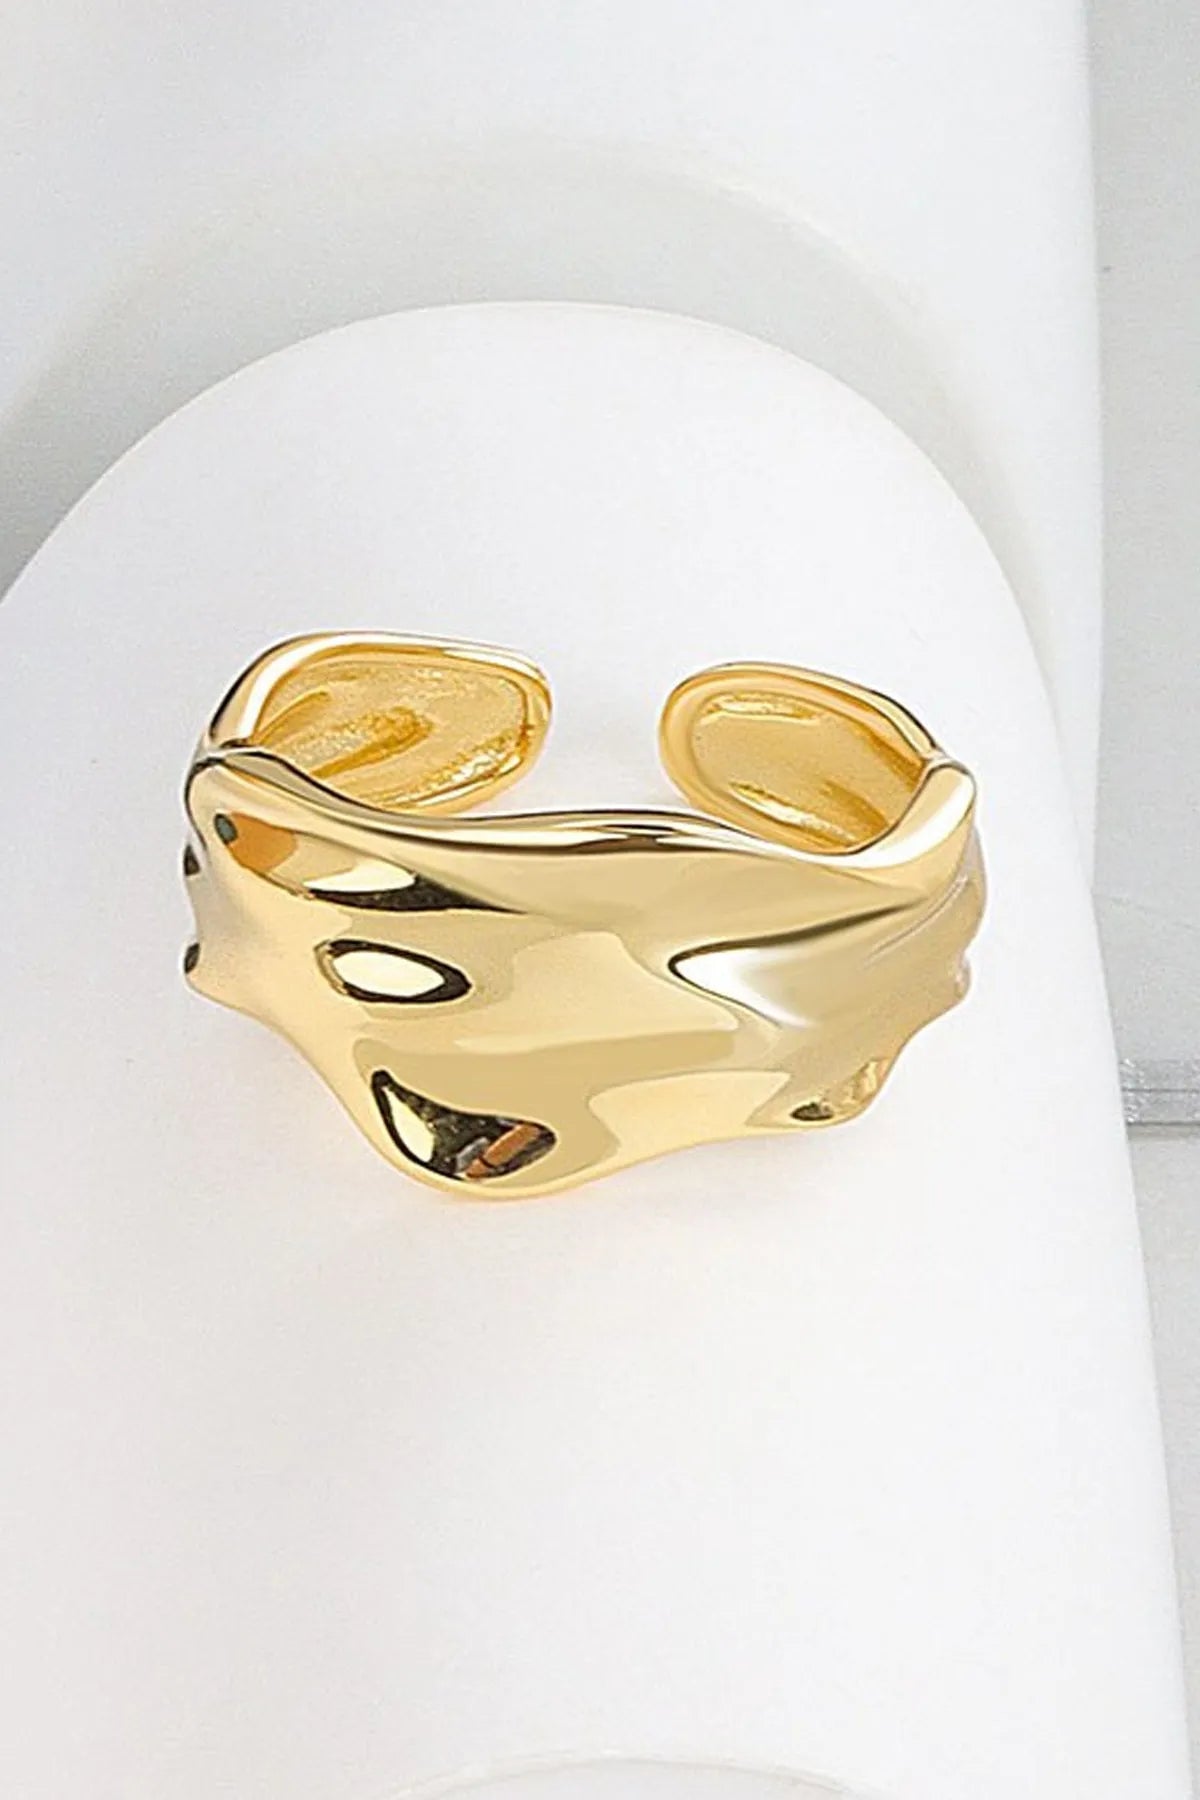 Women's Gold Color Design Ring with Adjustable Size